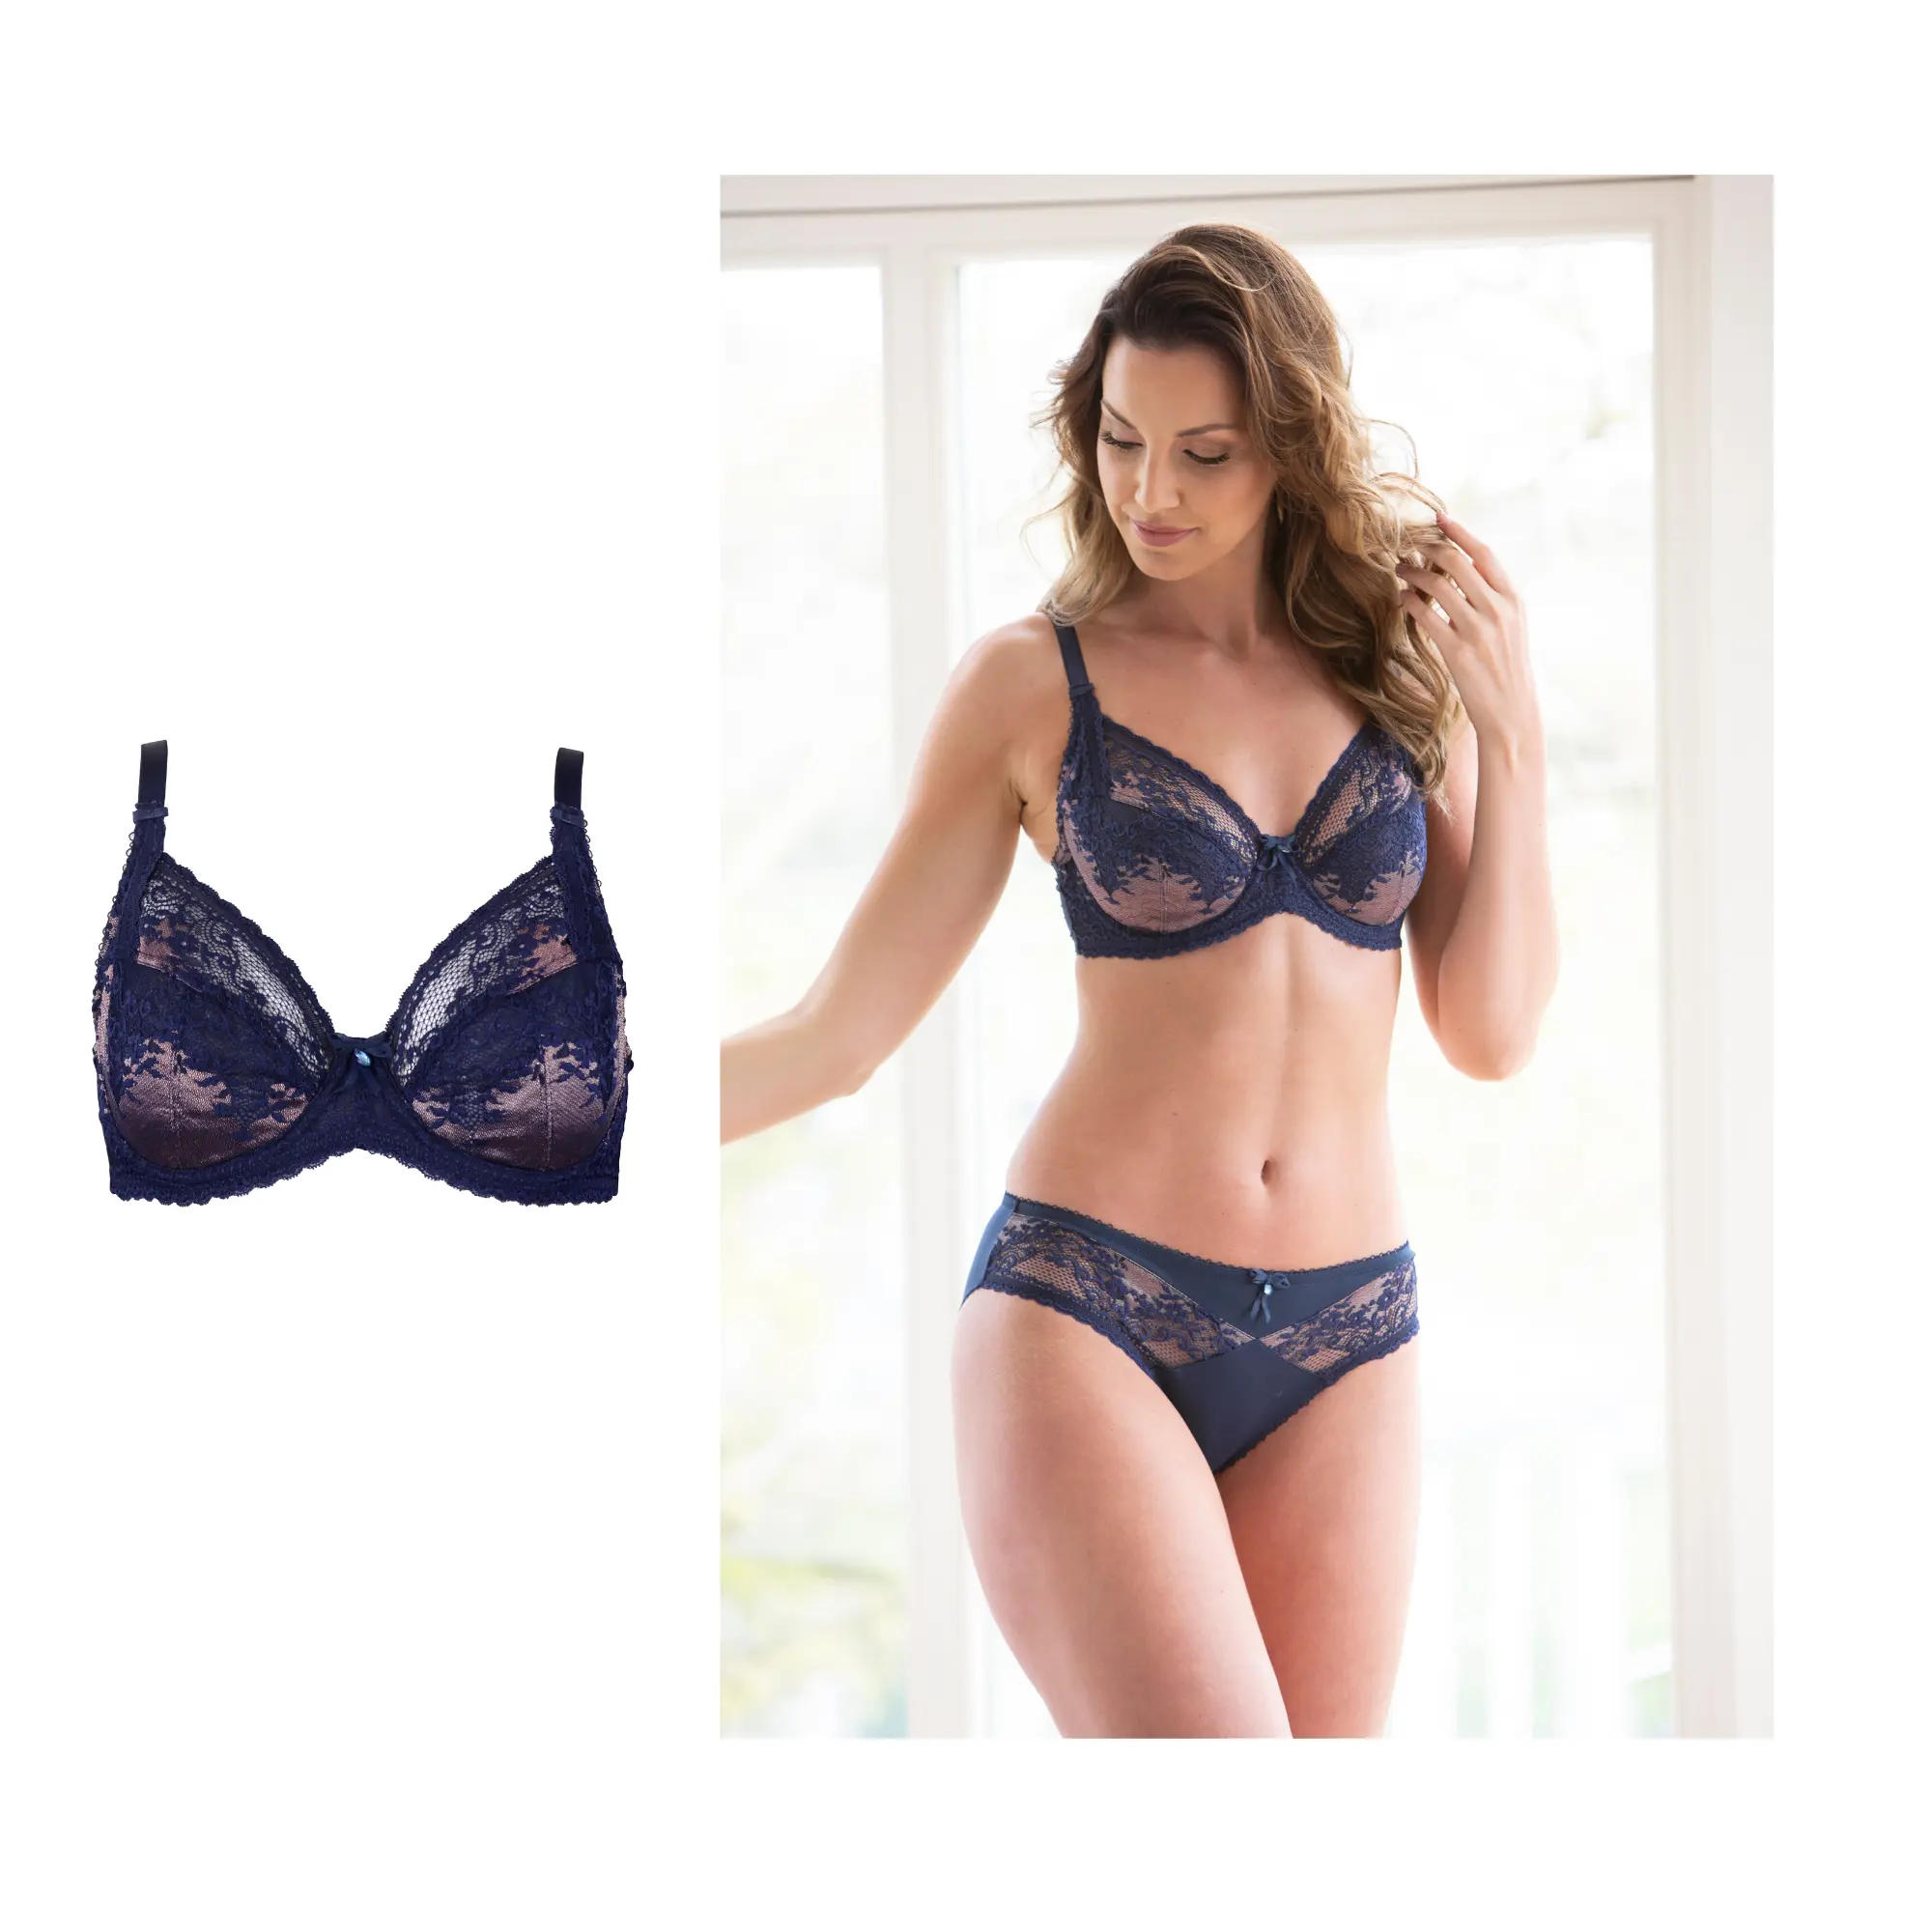 Cherry Blossom Intimates on X: The perfect bra will help you feel great  and look amazing! We're here to help every woman find the perfect fit. We  carry beautiful bras for all